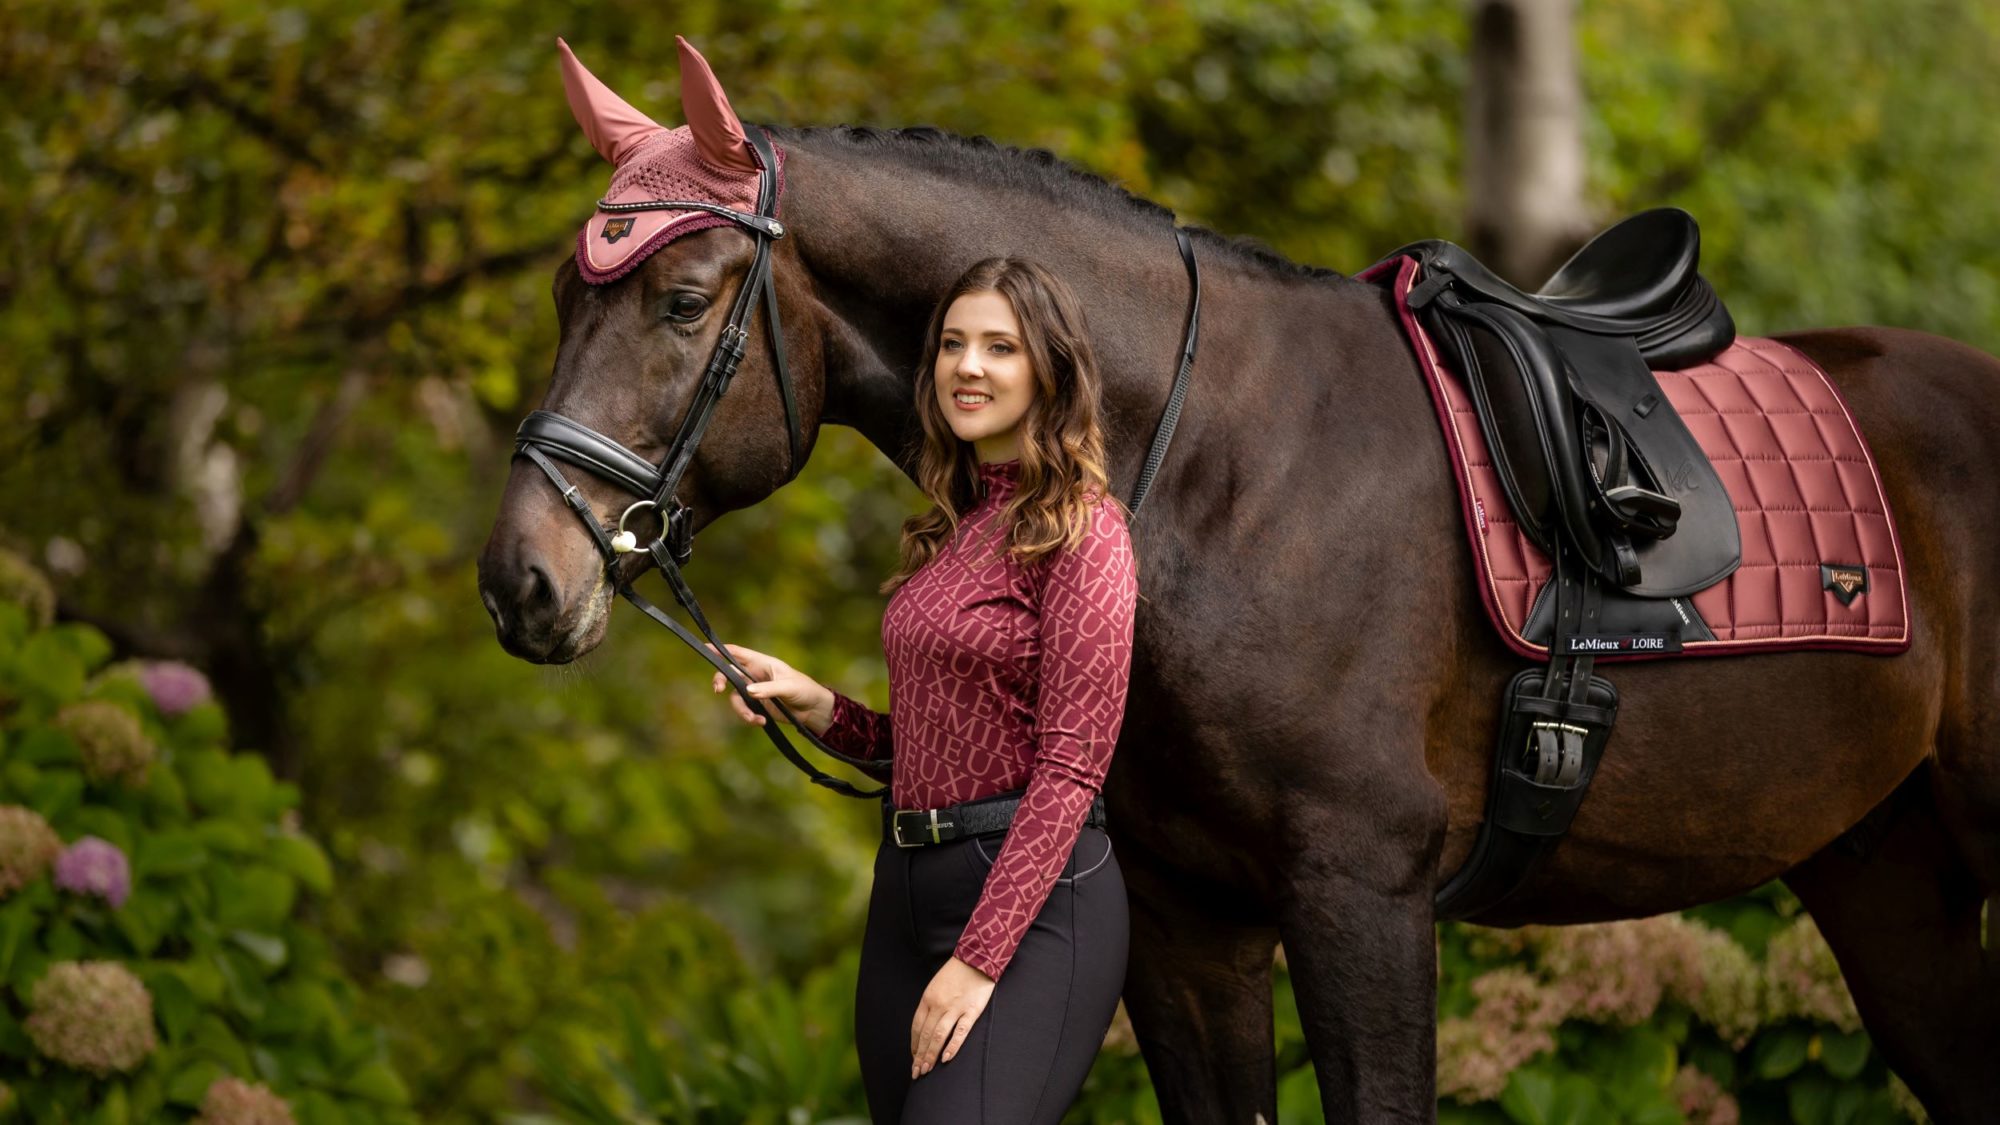 Equestrian brand, LeMieux, takes the reins of product experience in partnership with Akeneo